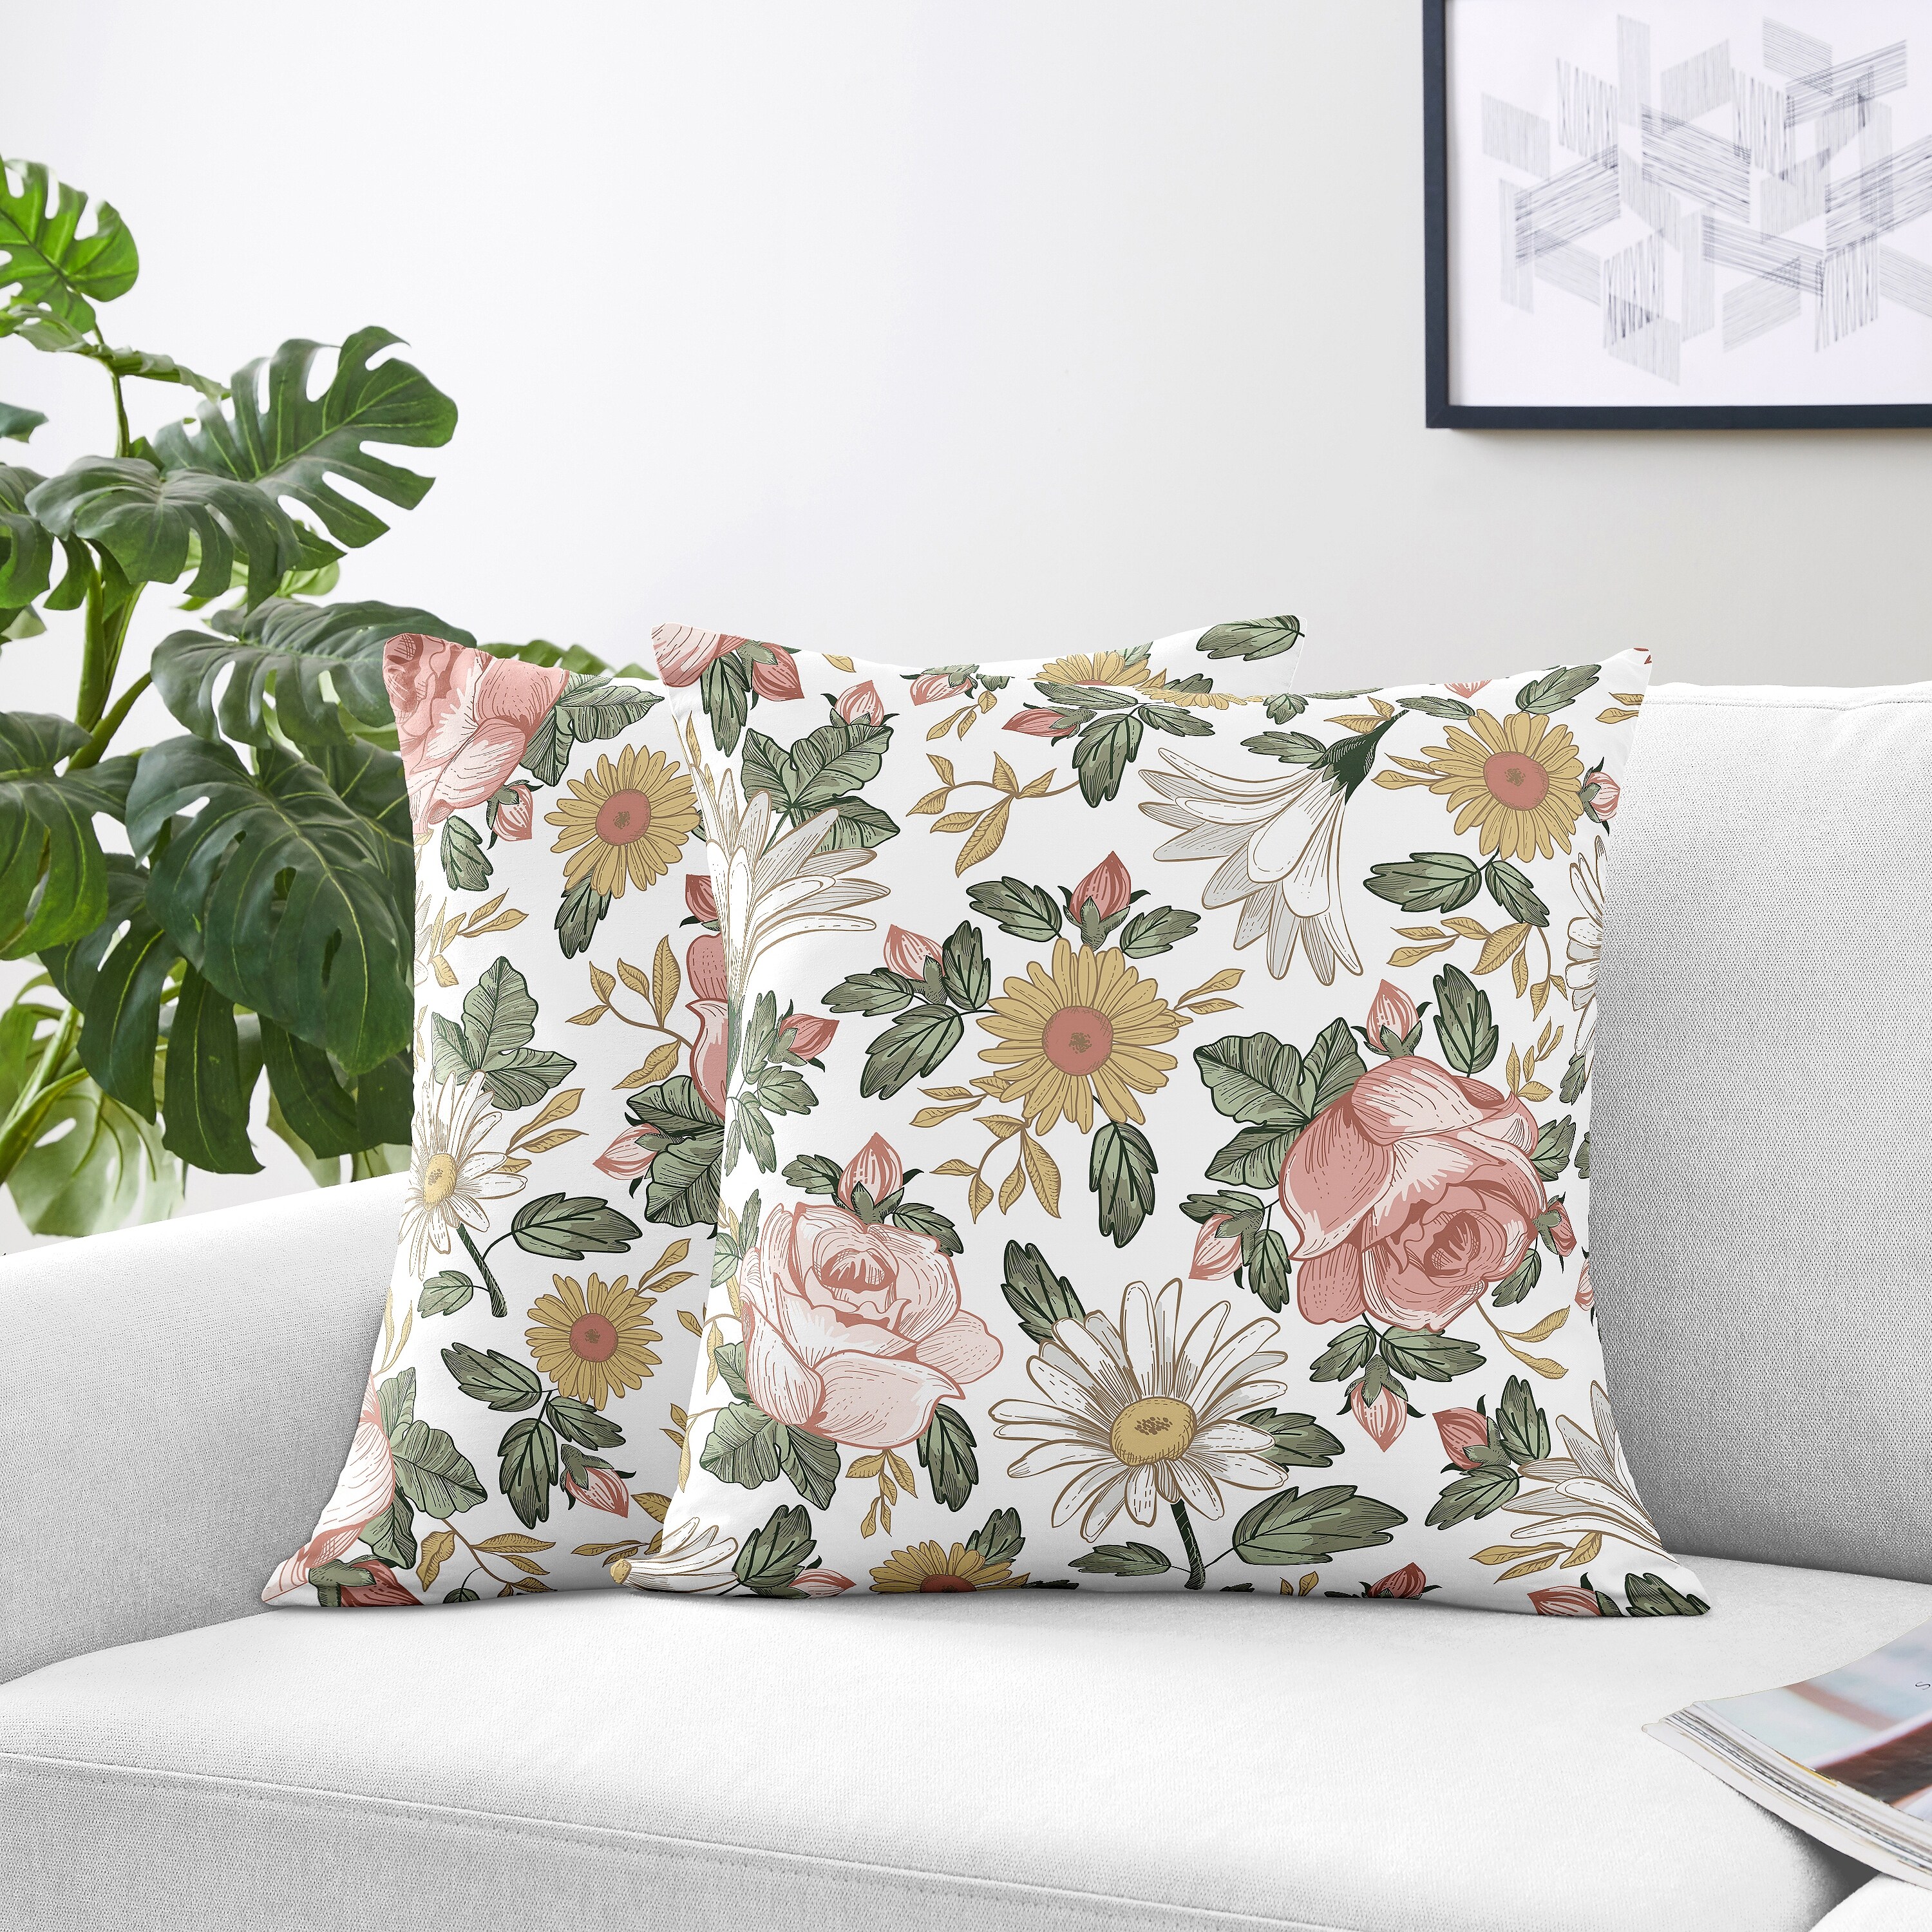 https://ak1.ostkcdn.com/images/products/is/images/direct/cfd3bc942d9b2fe7984c55d16592d900a04fa1ed/Sweet-Jojo-Designs-Vintage-Floral-Boho-18-inch-Decorative-Accent-Throw-Pillows-%28Set-of-2%29---Pink-Yellow-Green-White-Shabby-Chic.jpg